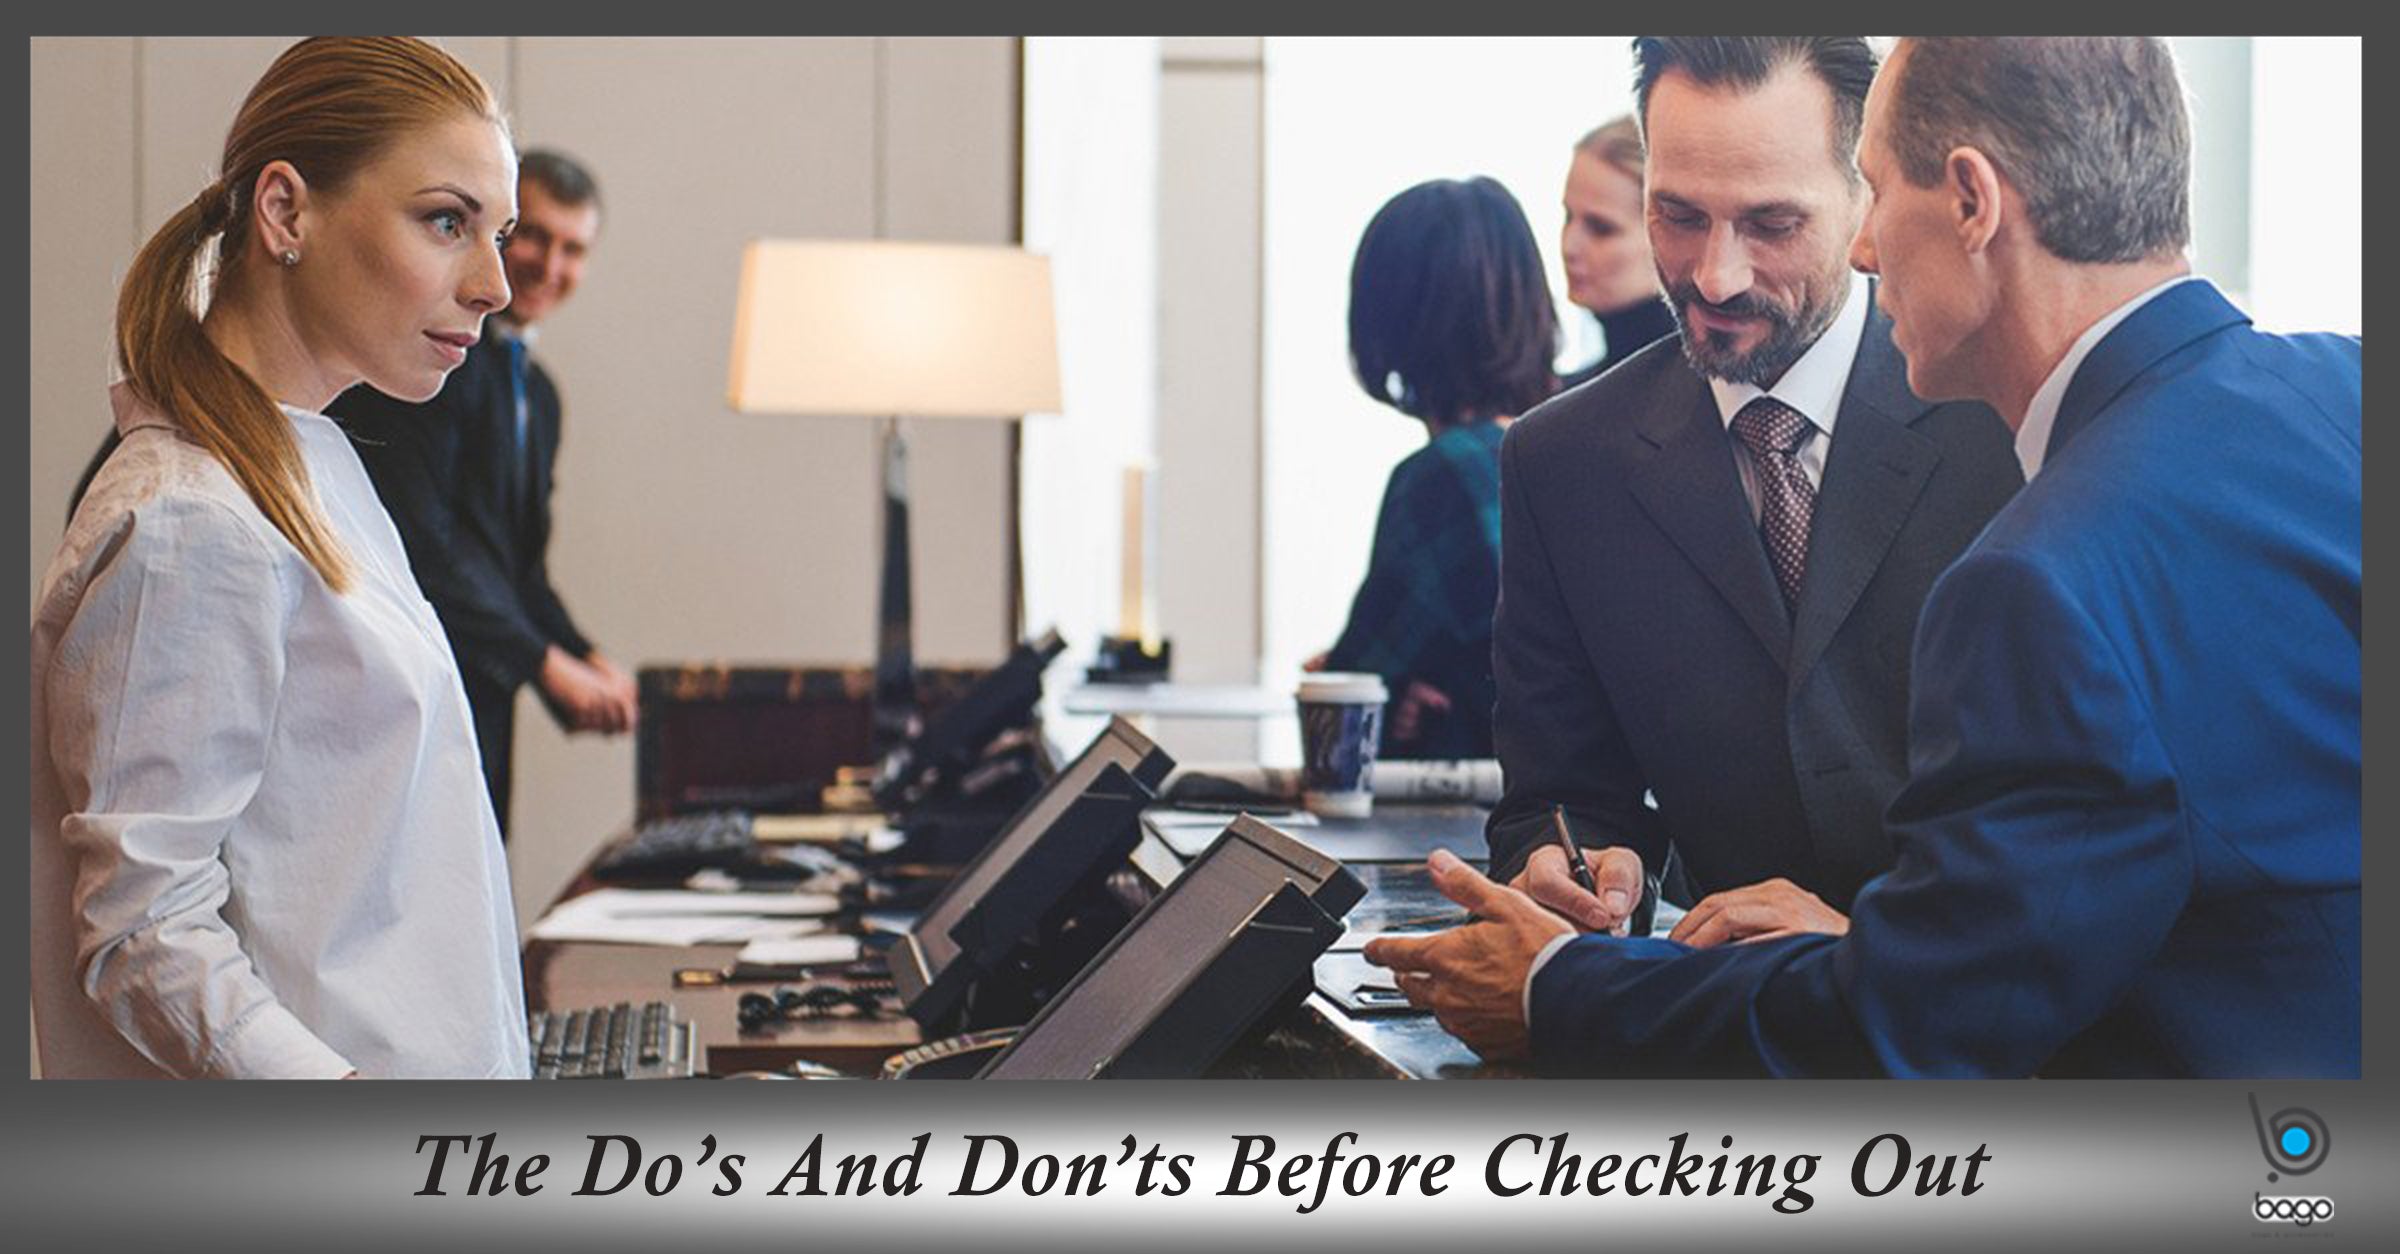 The Do's And Don'ts Before Checking Out